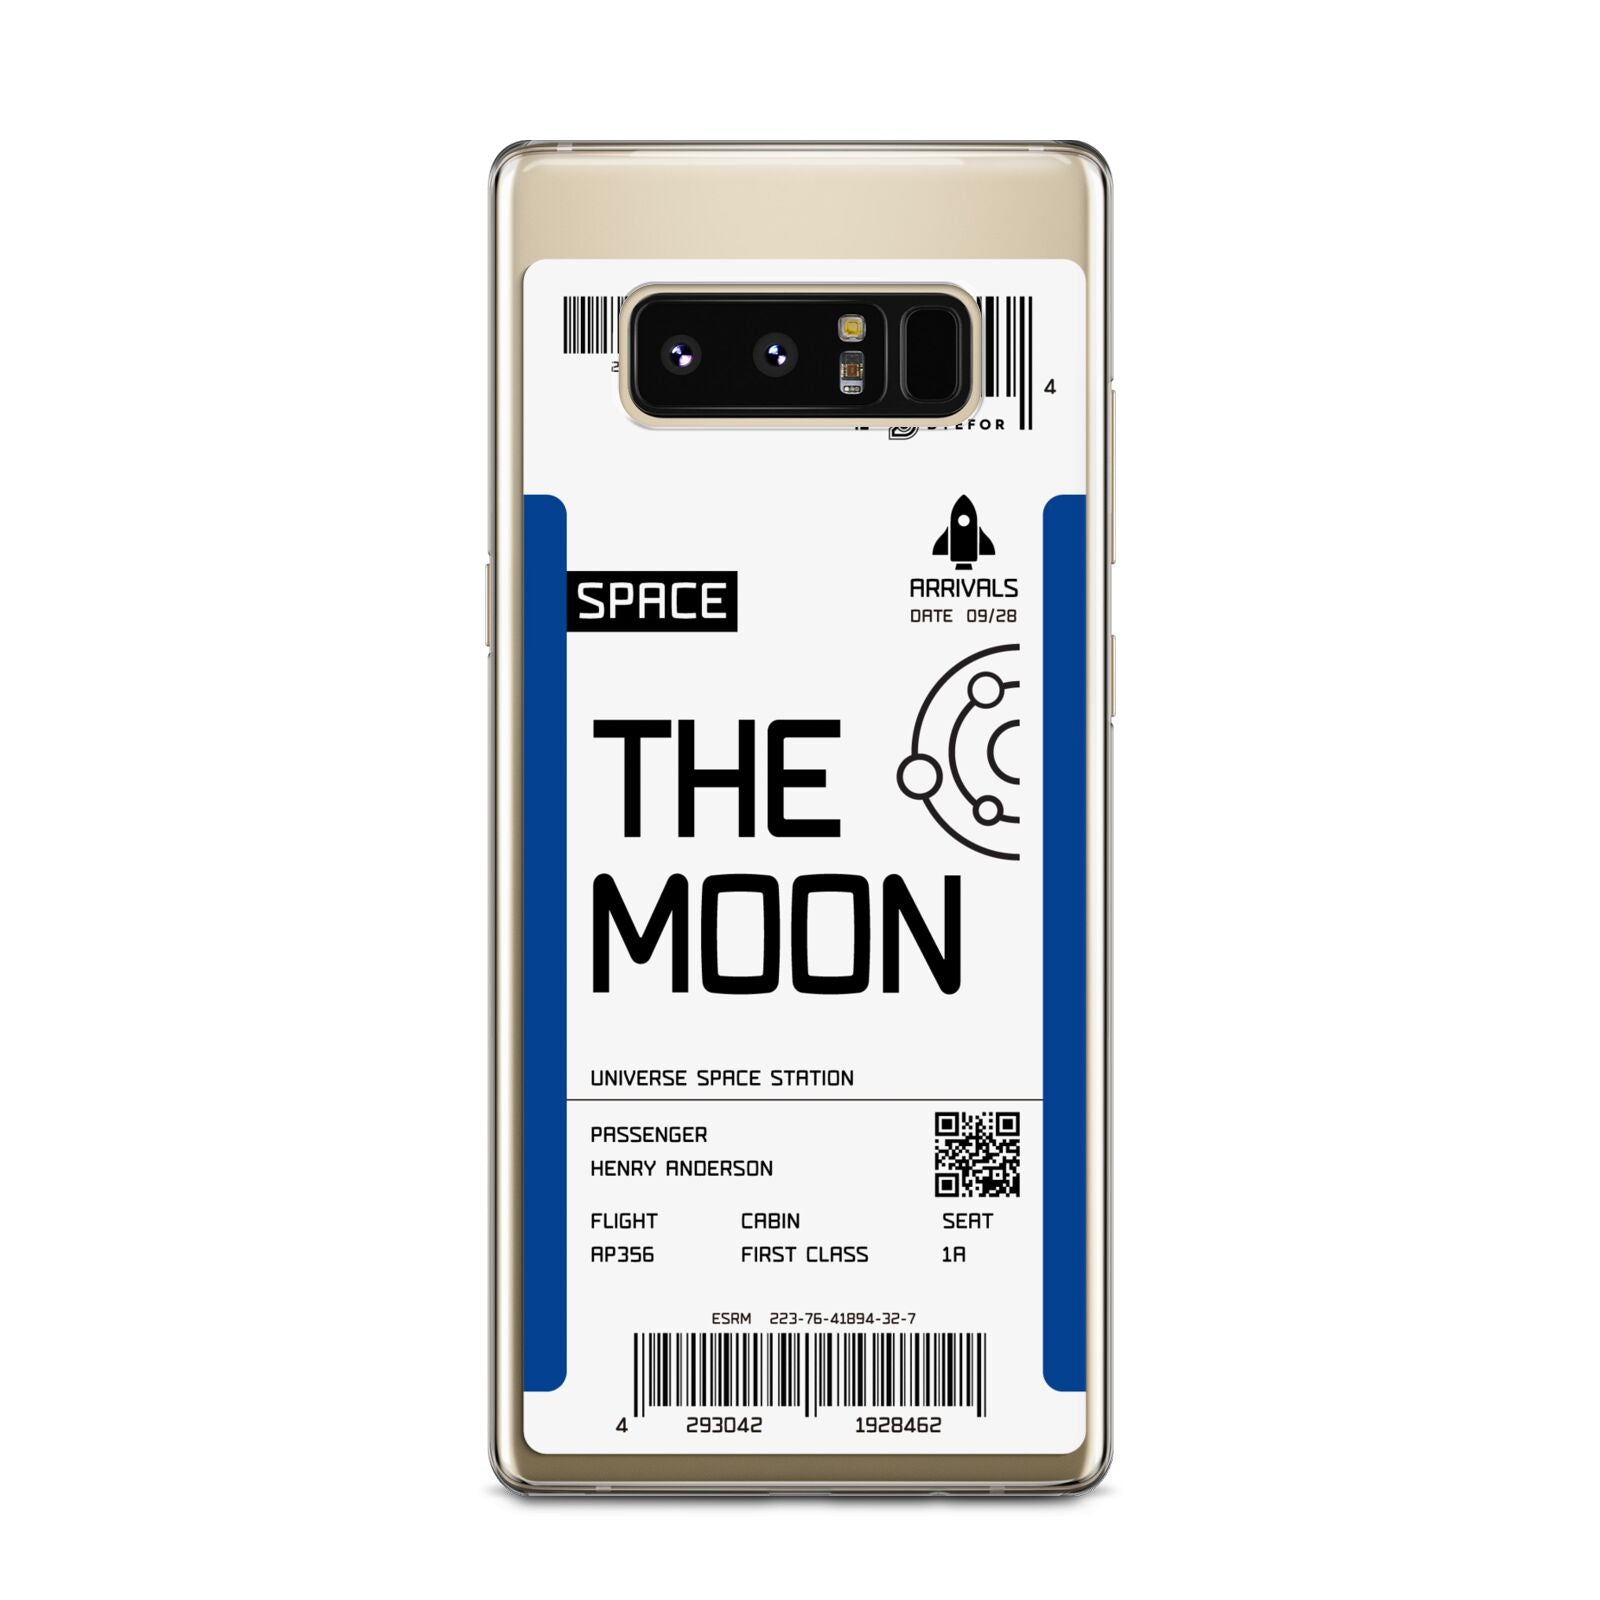 The Moon Boarding Pass Samsung Galaxy Note 8 Case